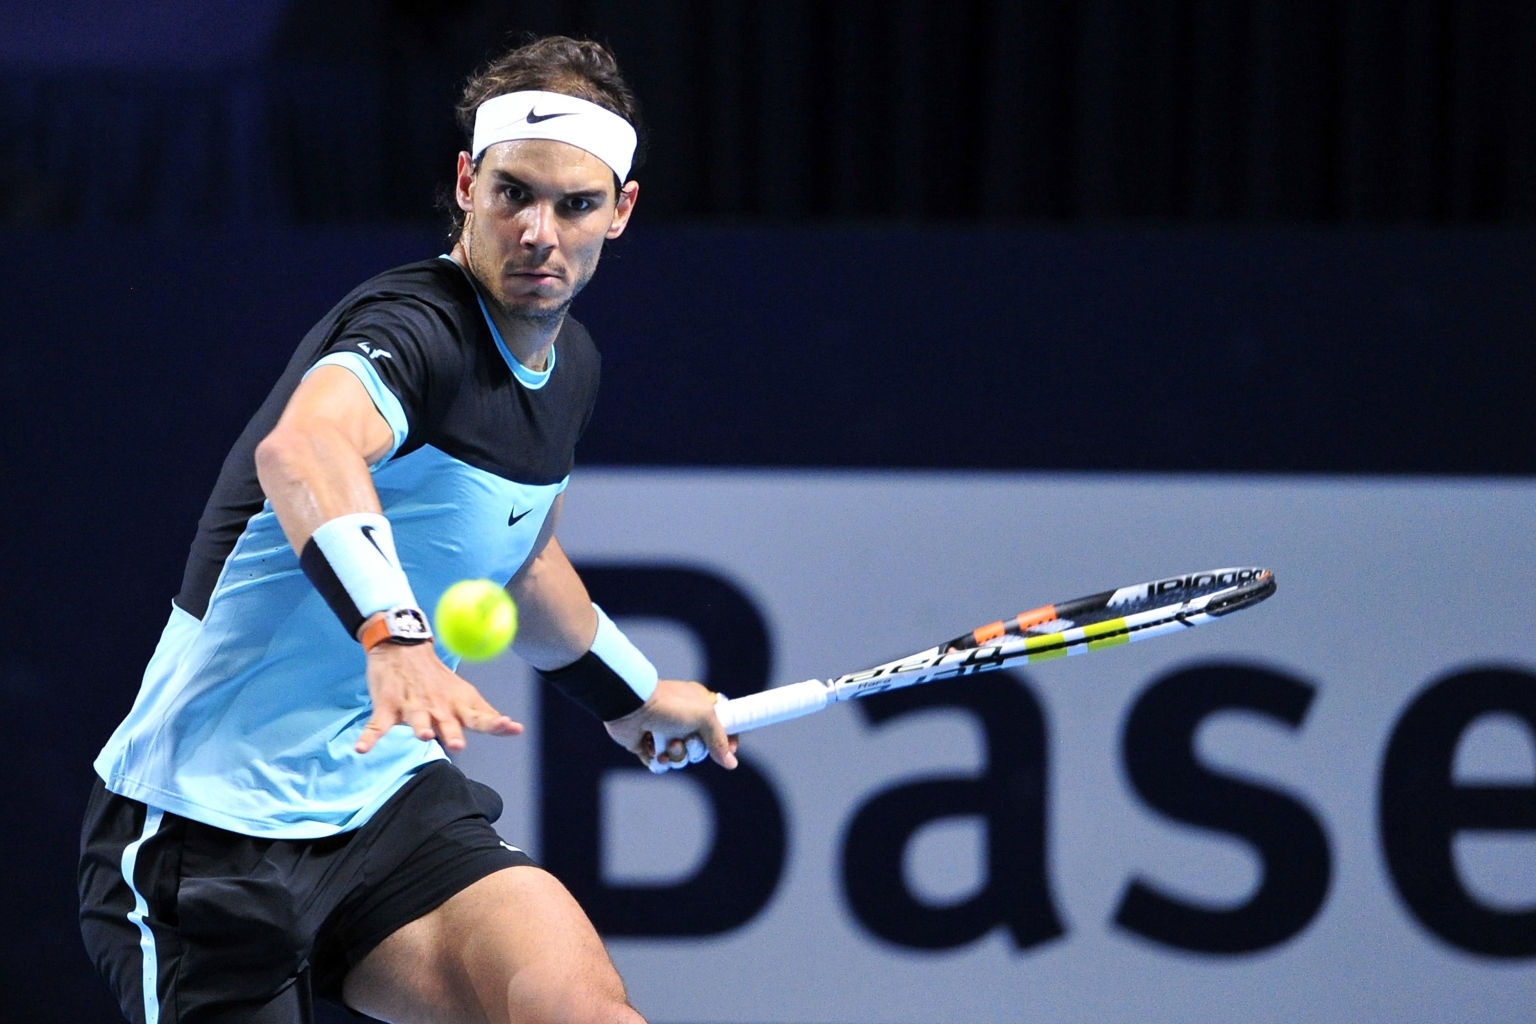 BASEL, SWITZERLAND - NOVEMBER 01:  Rafael Nadal  of Spain in action during the final match of the Swiss Indoors ATP 500 tennis tournament against Roger Federer of Switzerland at St Jakobshalle on November 1, 2015 in Basel, Switzerland  (Photo by Harold Cunningham/Getty Images)